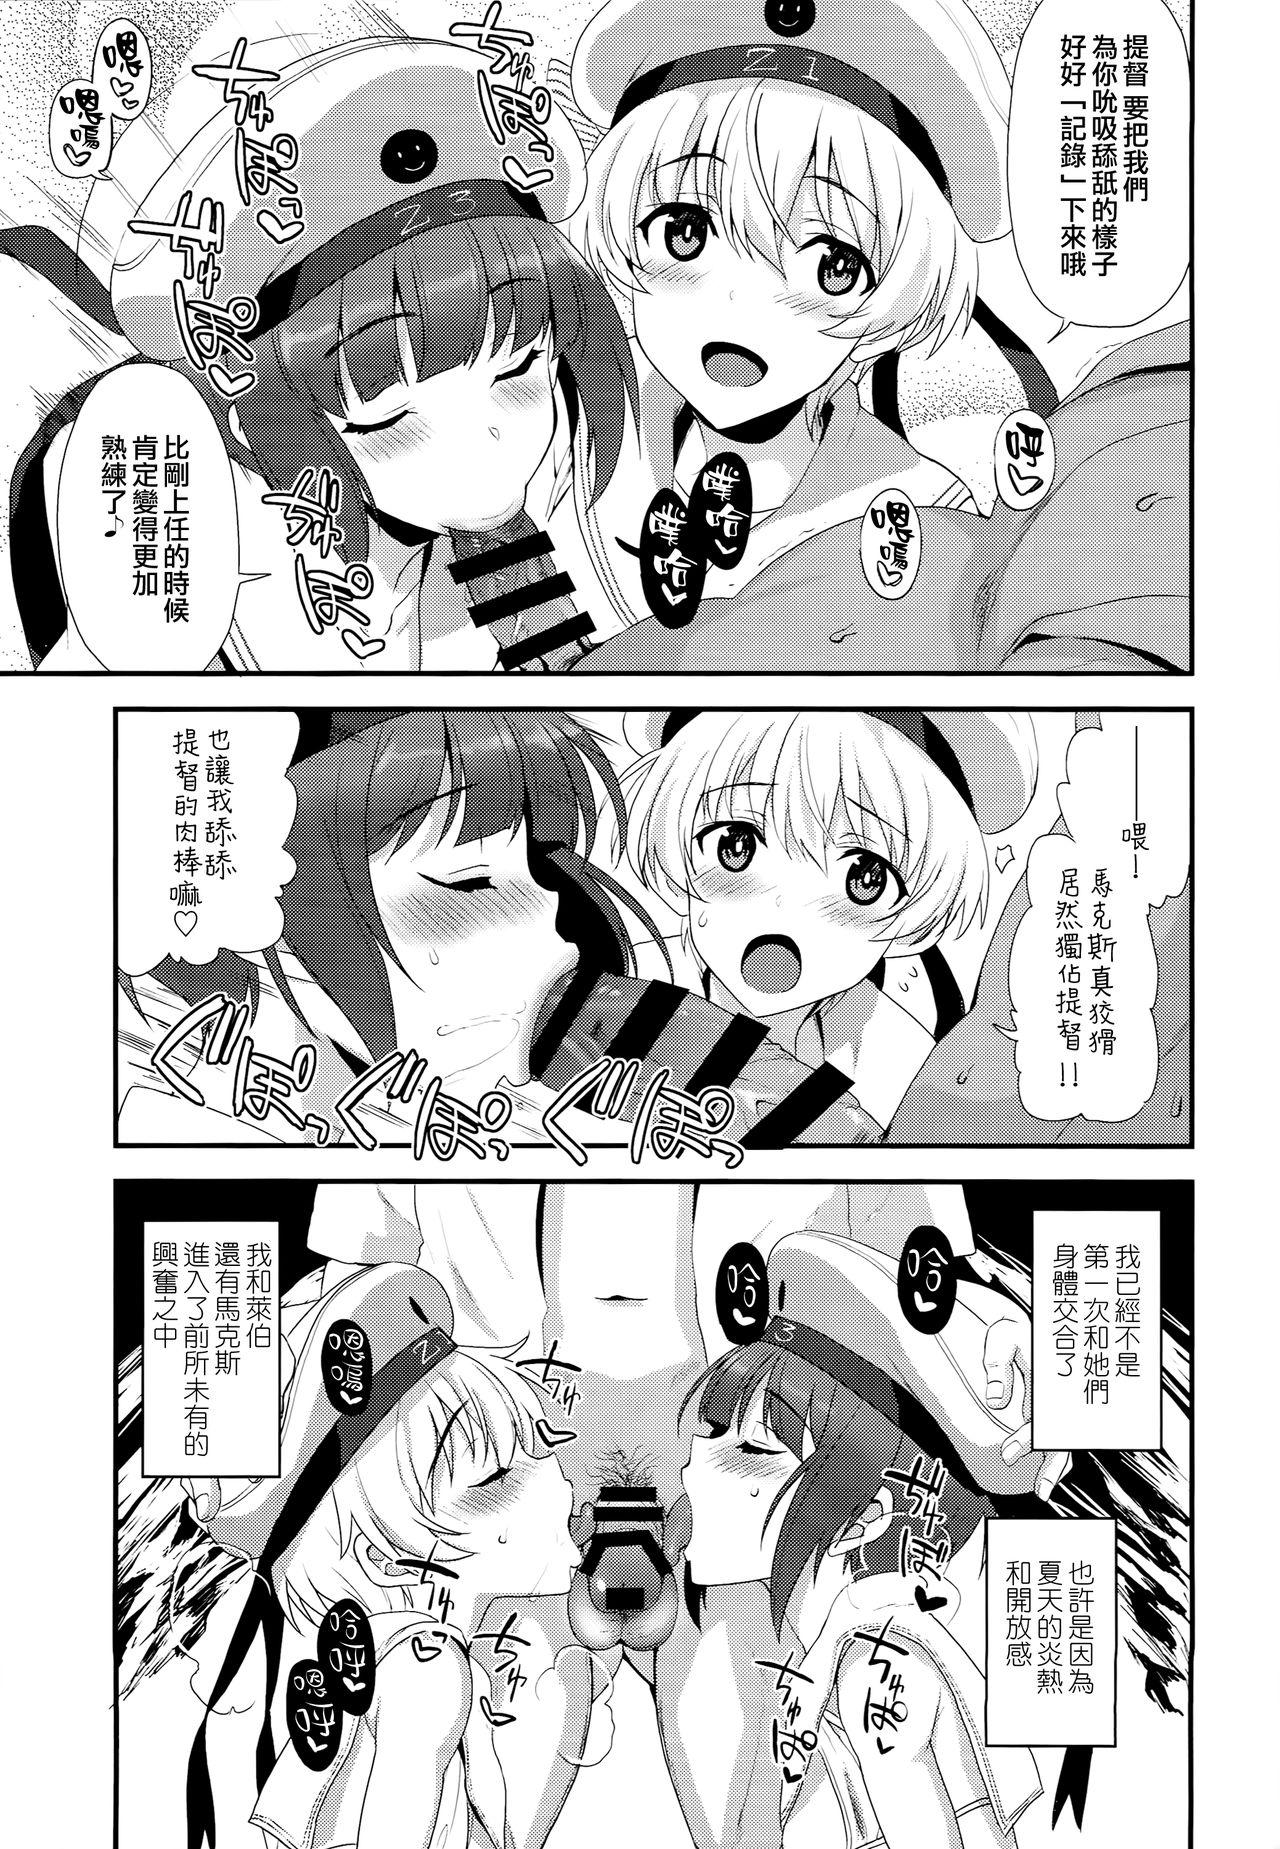 Tits Apfelschorle - Kantai collection Liveshow - Page 7